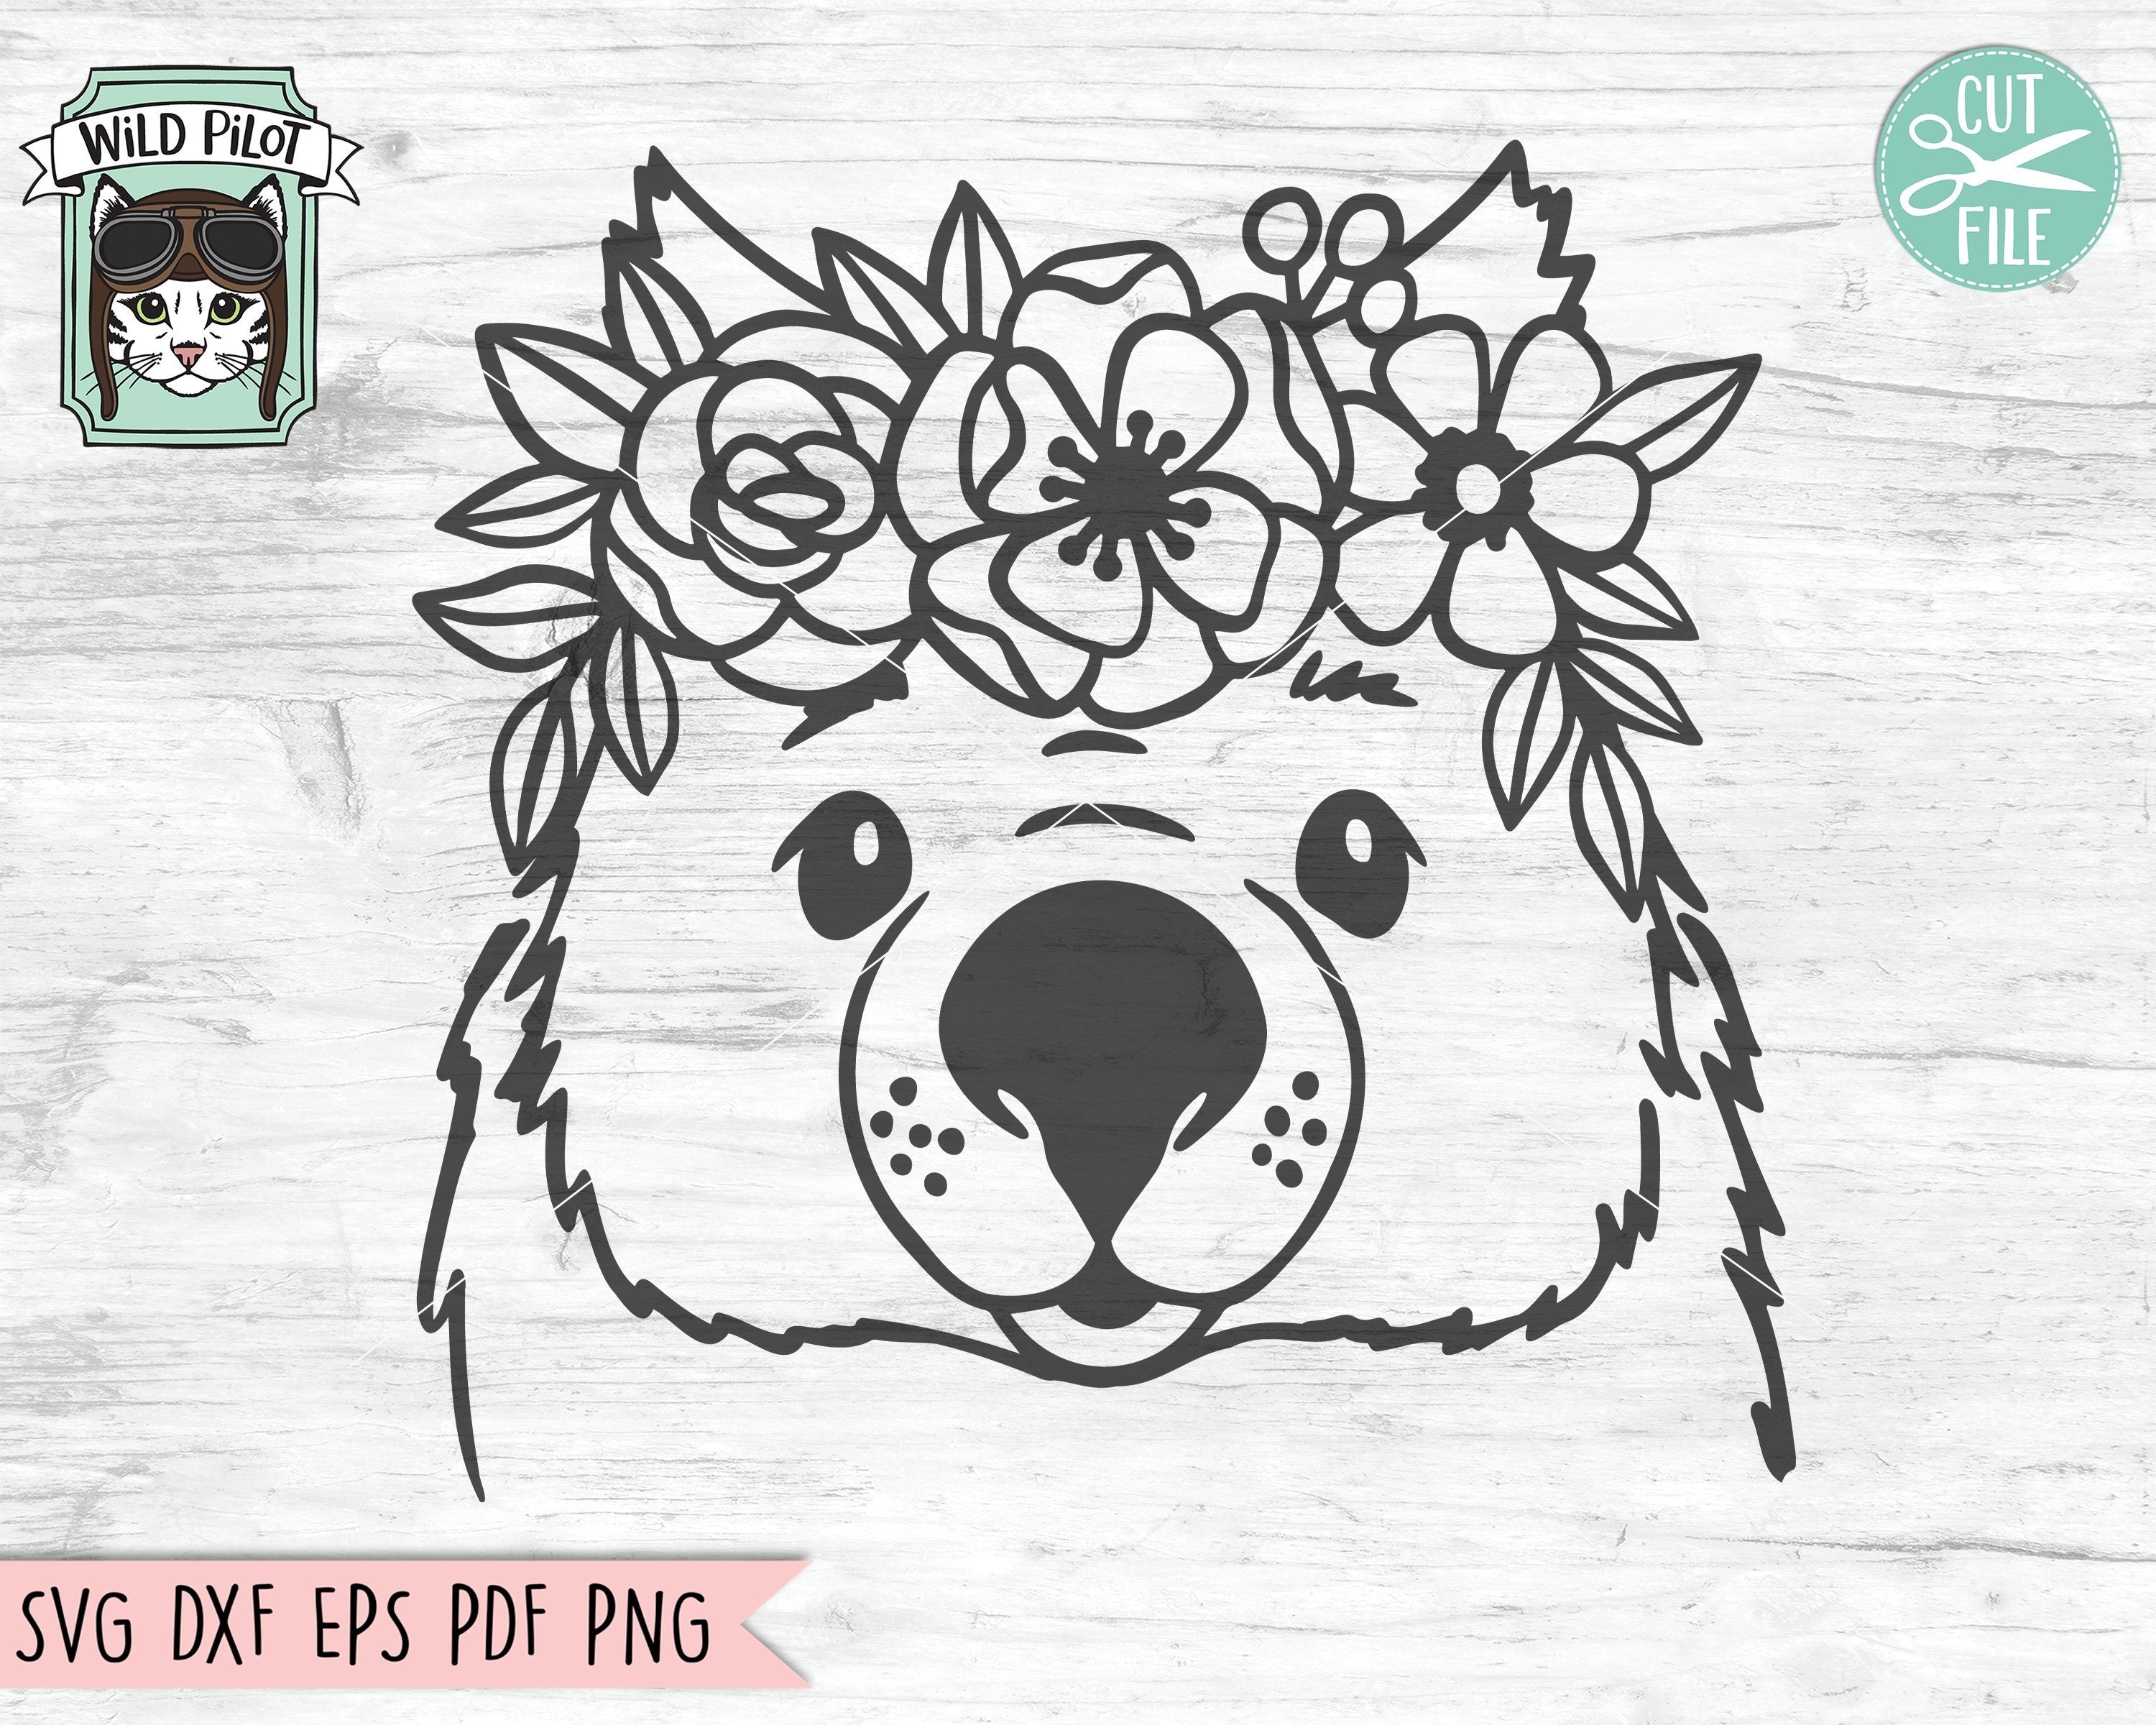 Download Wombat Svg File Wombat With Flower Crown Svg Wombat Cut File Animal Face Svg Floral Crown Svg Wombat With Flowers On Head Svg Australia Svg File So Fontsy